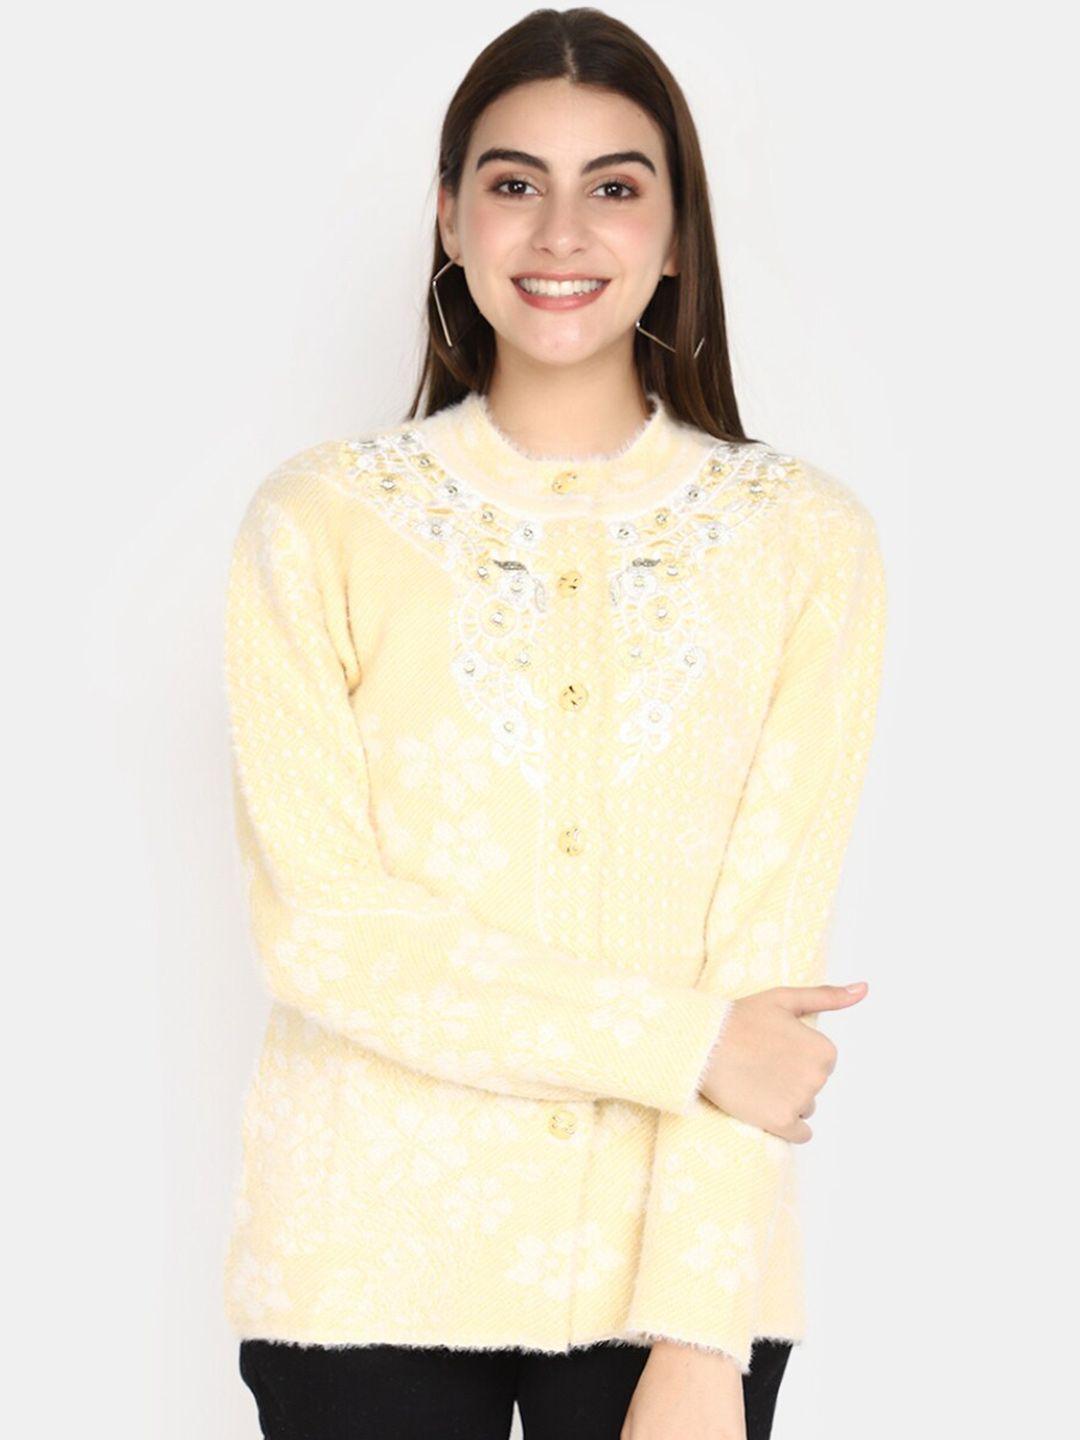 v-mart embroidered cotton cardigan sweater